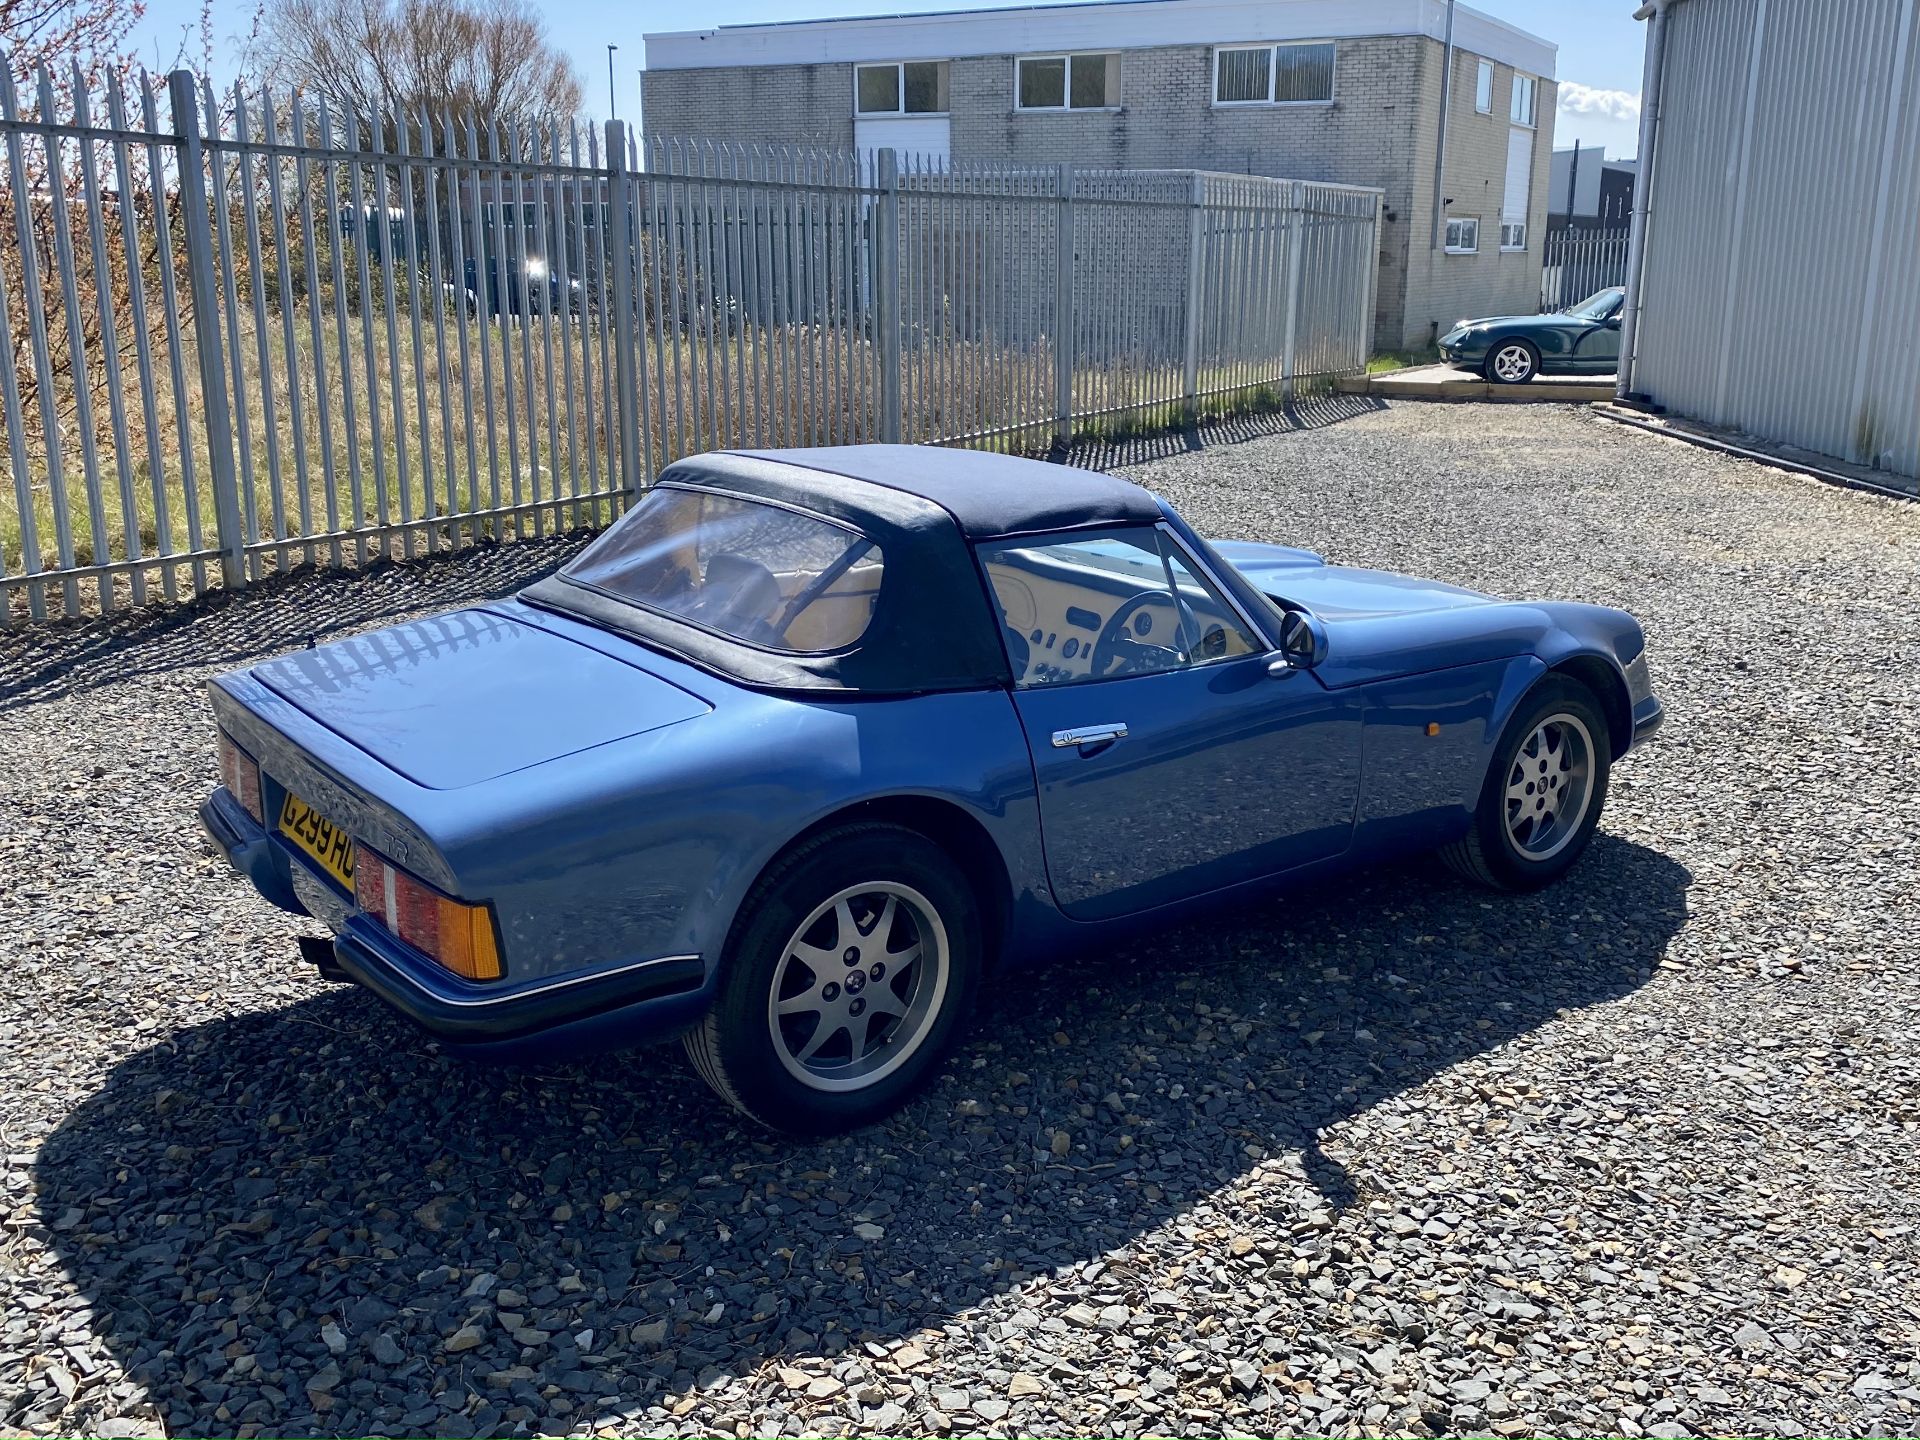 TVR S2 - Image 40 of 60